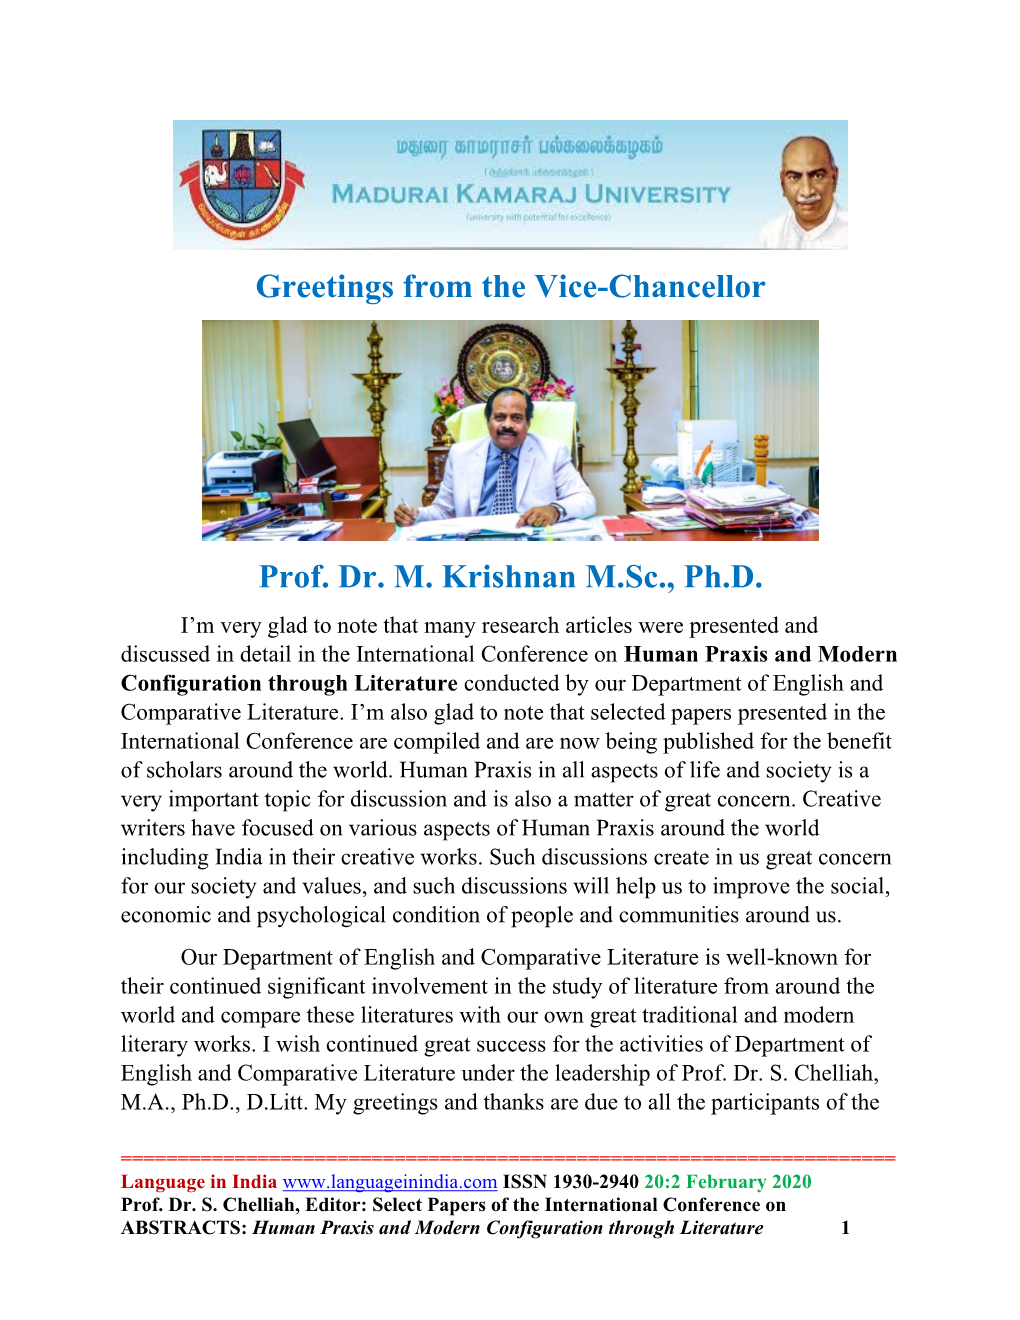 Greetings from the Vice-Chancellor Prof. Dr. M. Krishnan M.Sc., Ph.D